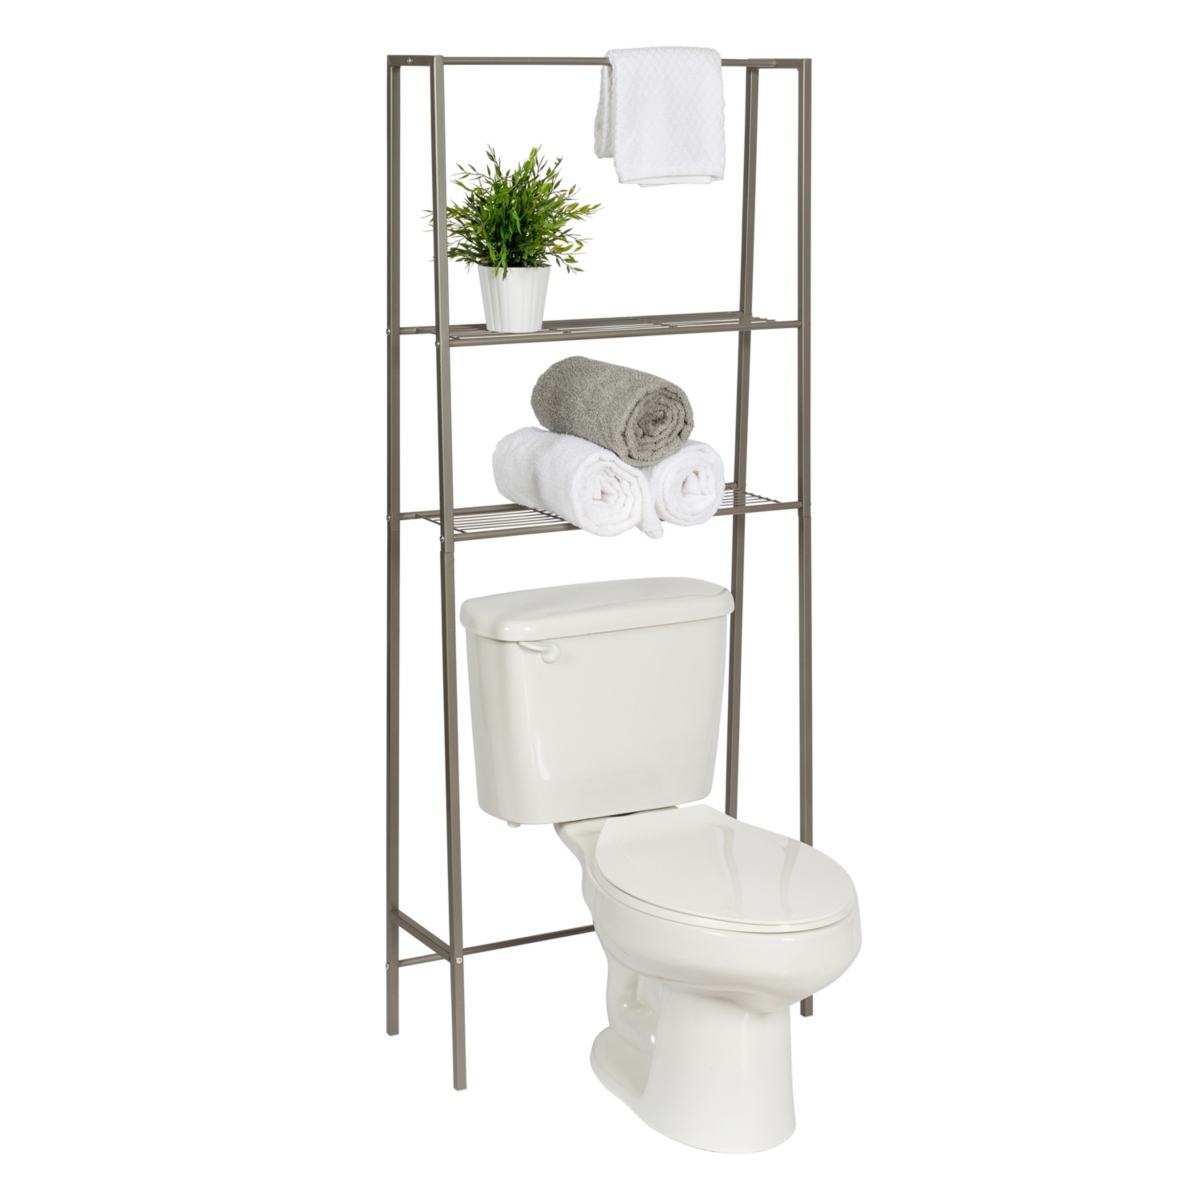 Over-The-Toilet Steel Space Saver Shelving Unit with Baskets - Gray